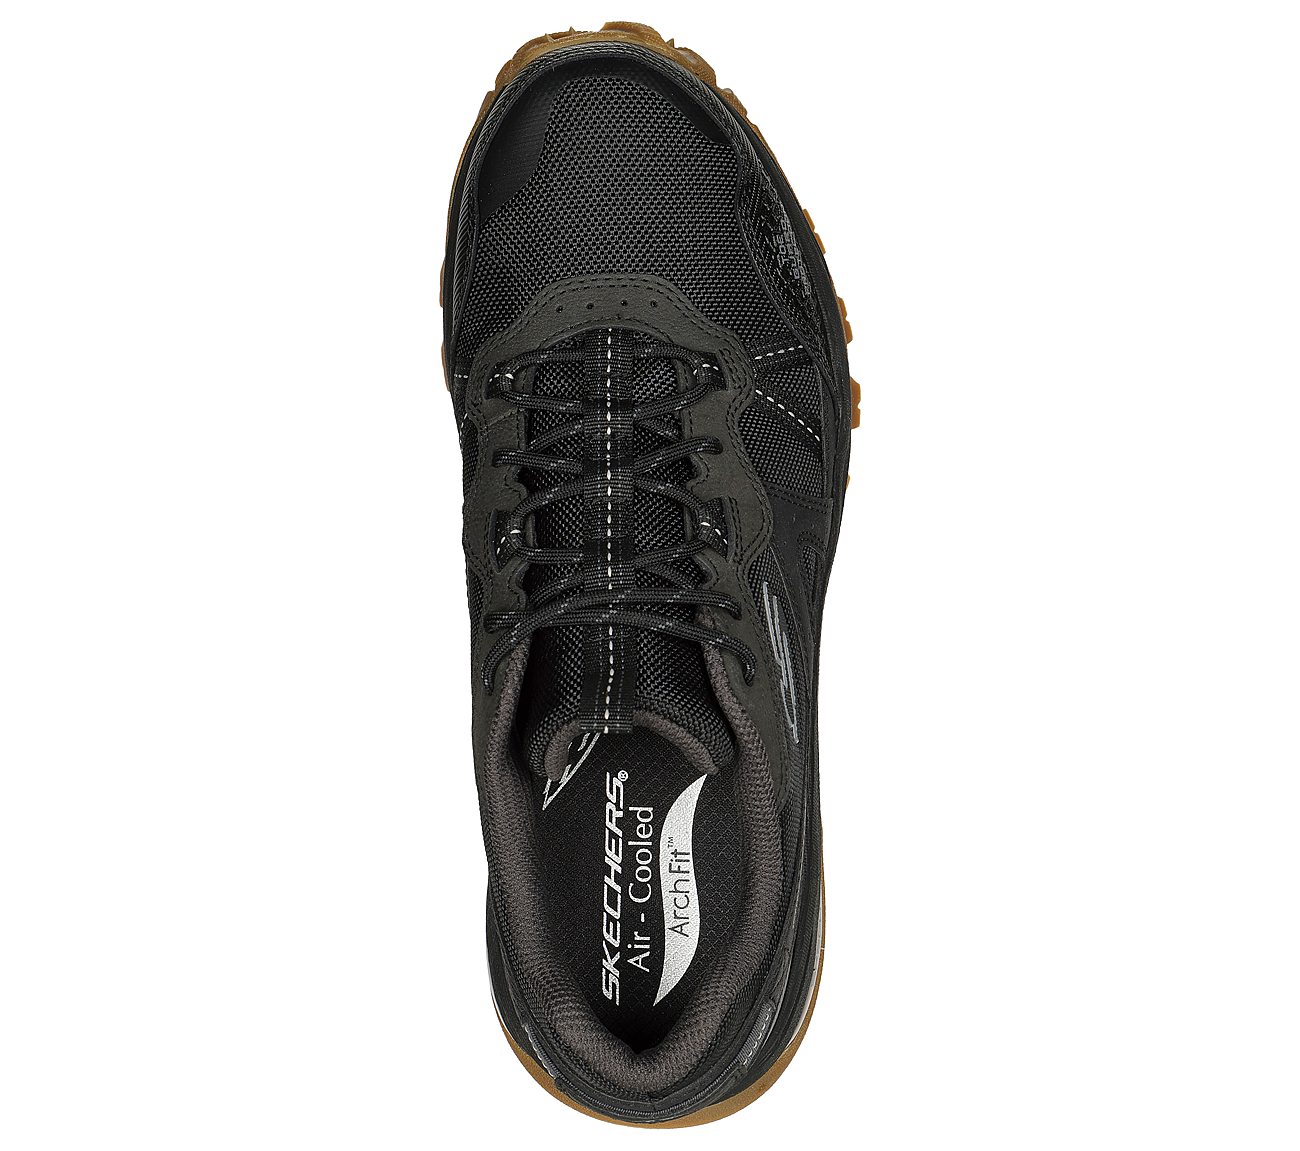 ARCH FIT TRAIL AIR, BBBBLACK Footwear Top View